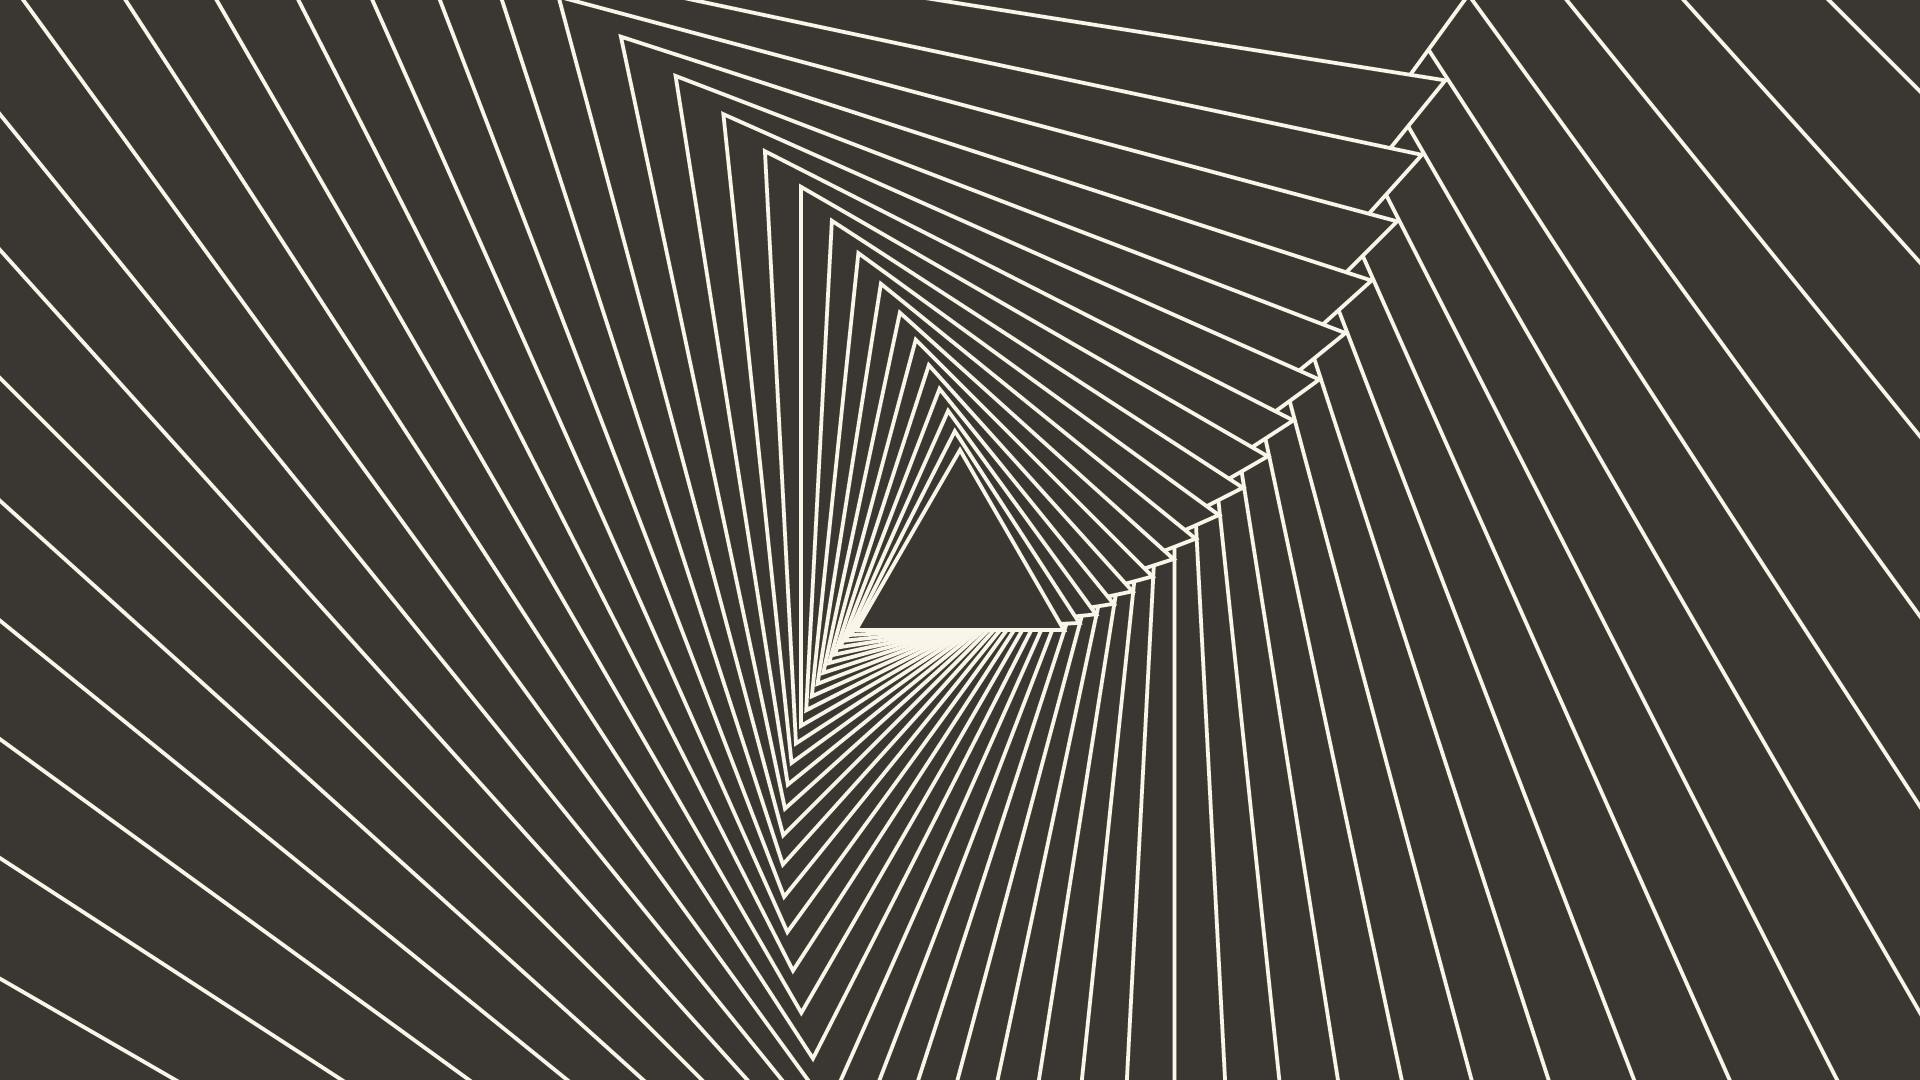 A black and white abstract design featuring a triangle, outlined in white, at the center of the screen, with several larger triangles radiating outward from it.